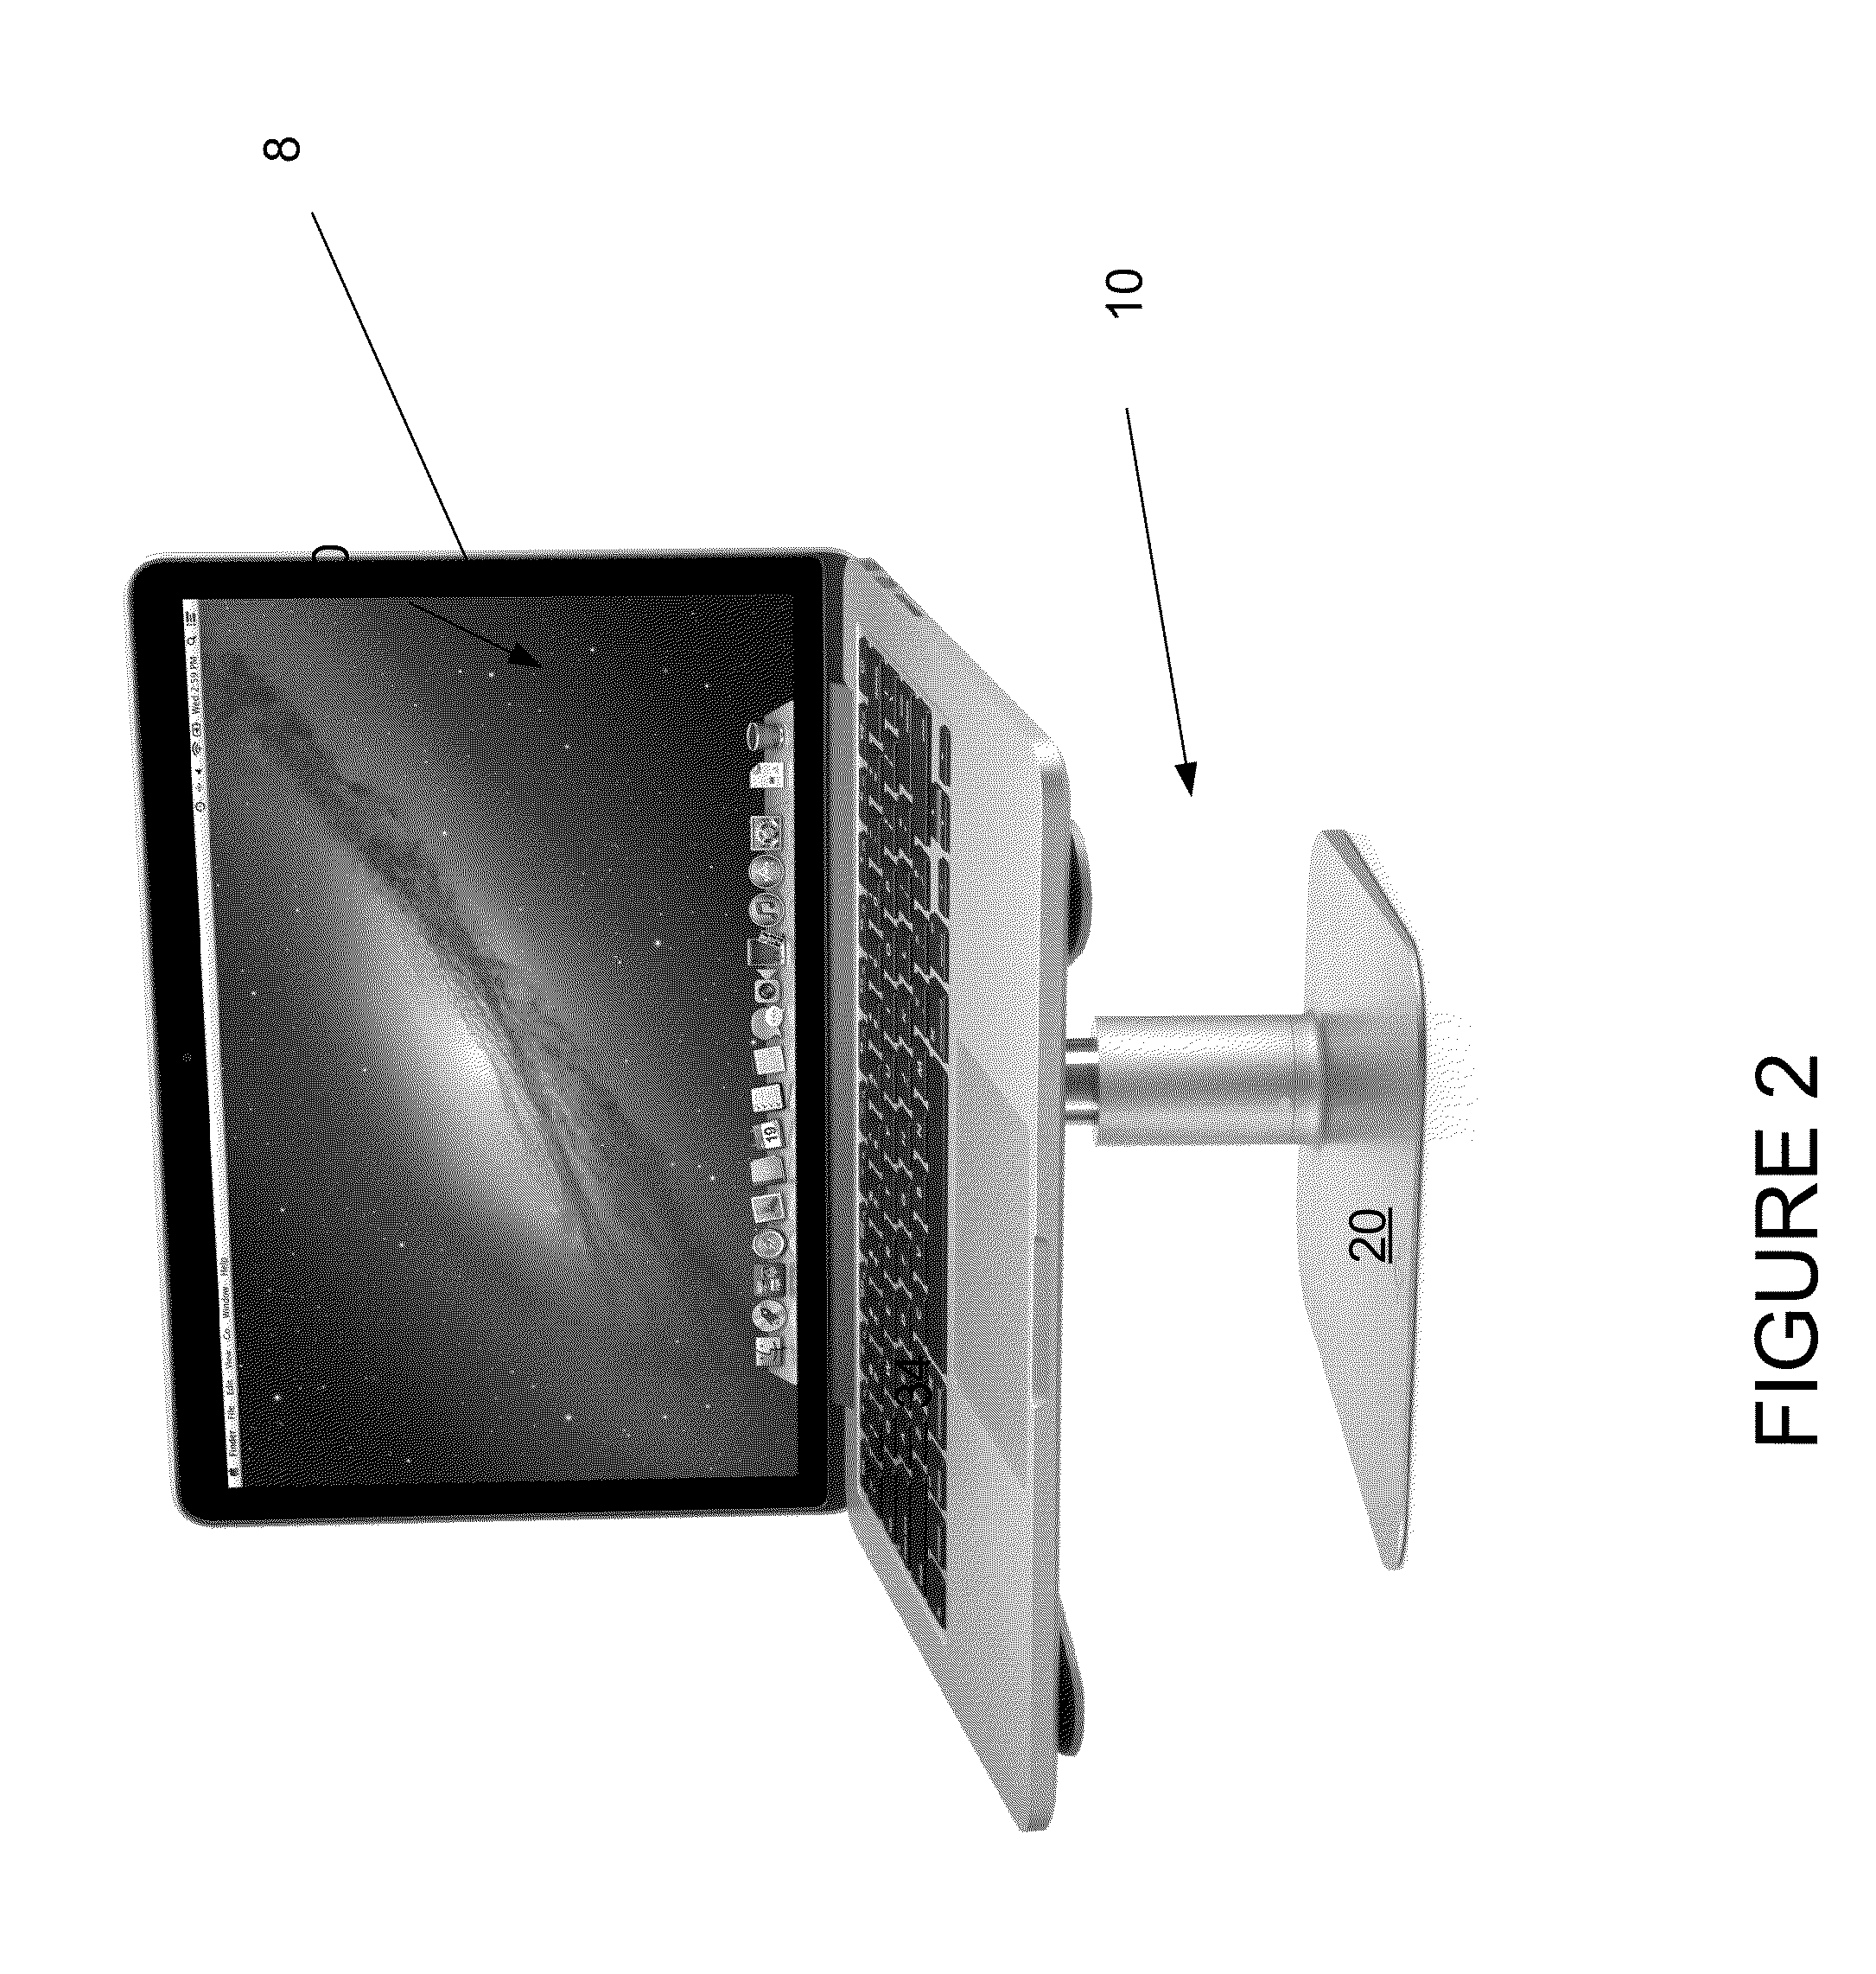 Adjustable stand for computing device